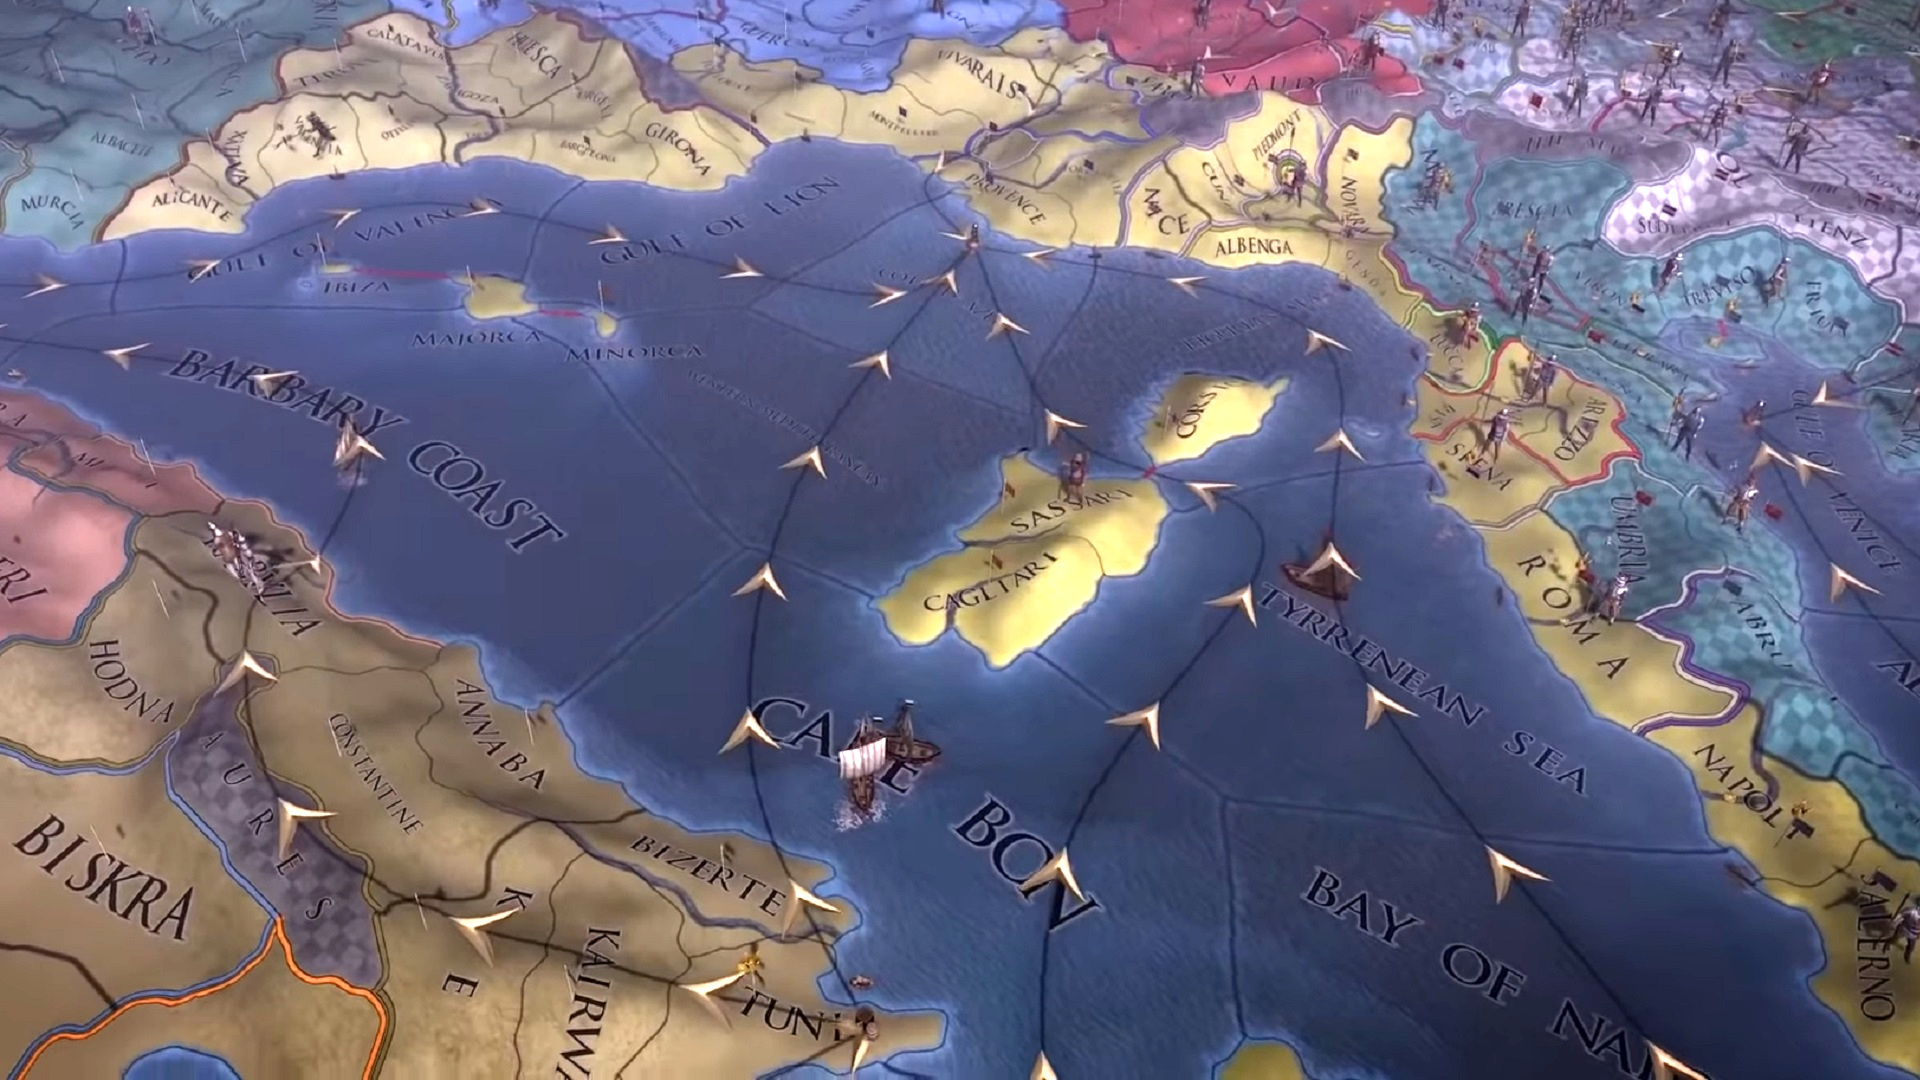 EU4 player maps out the strategy game’s trade nodes to show which is better